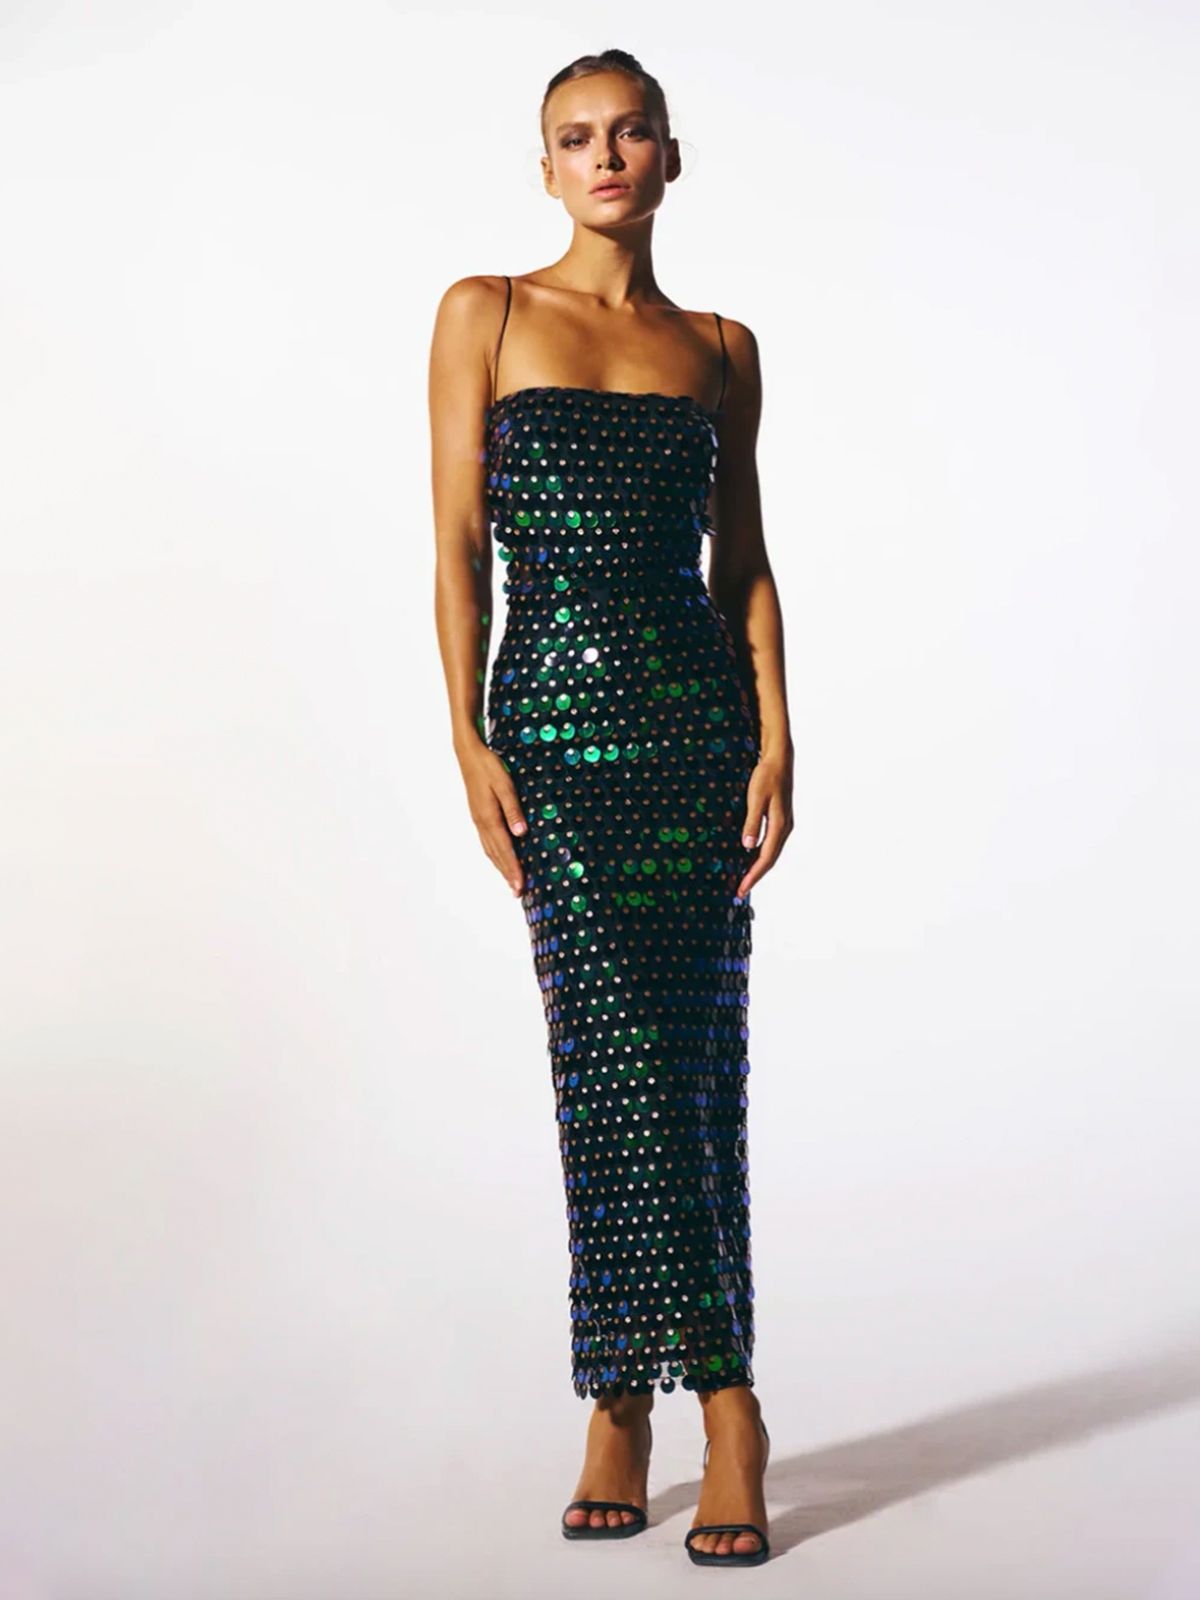 Party dresses to dazzle in